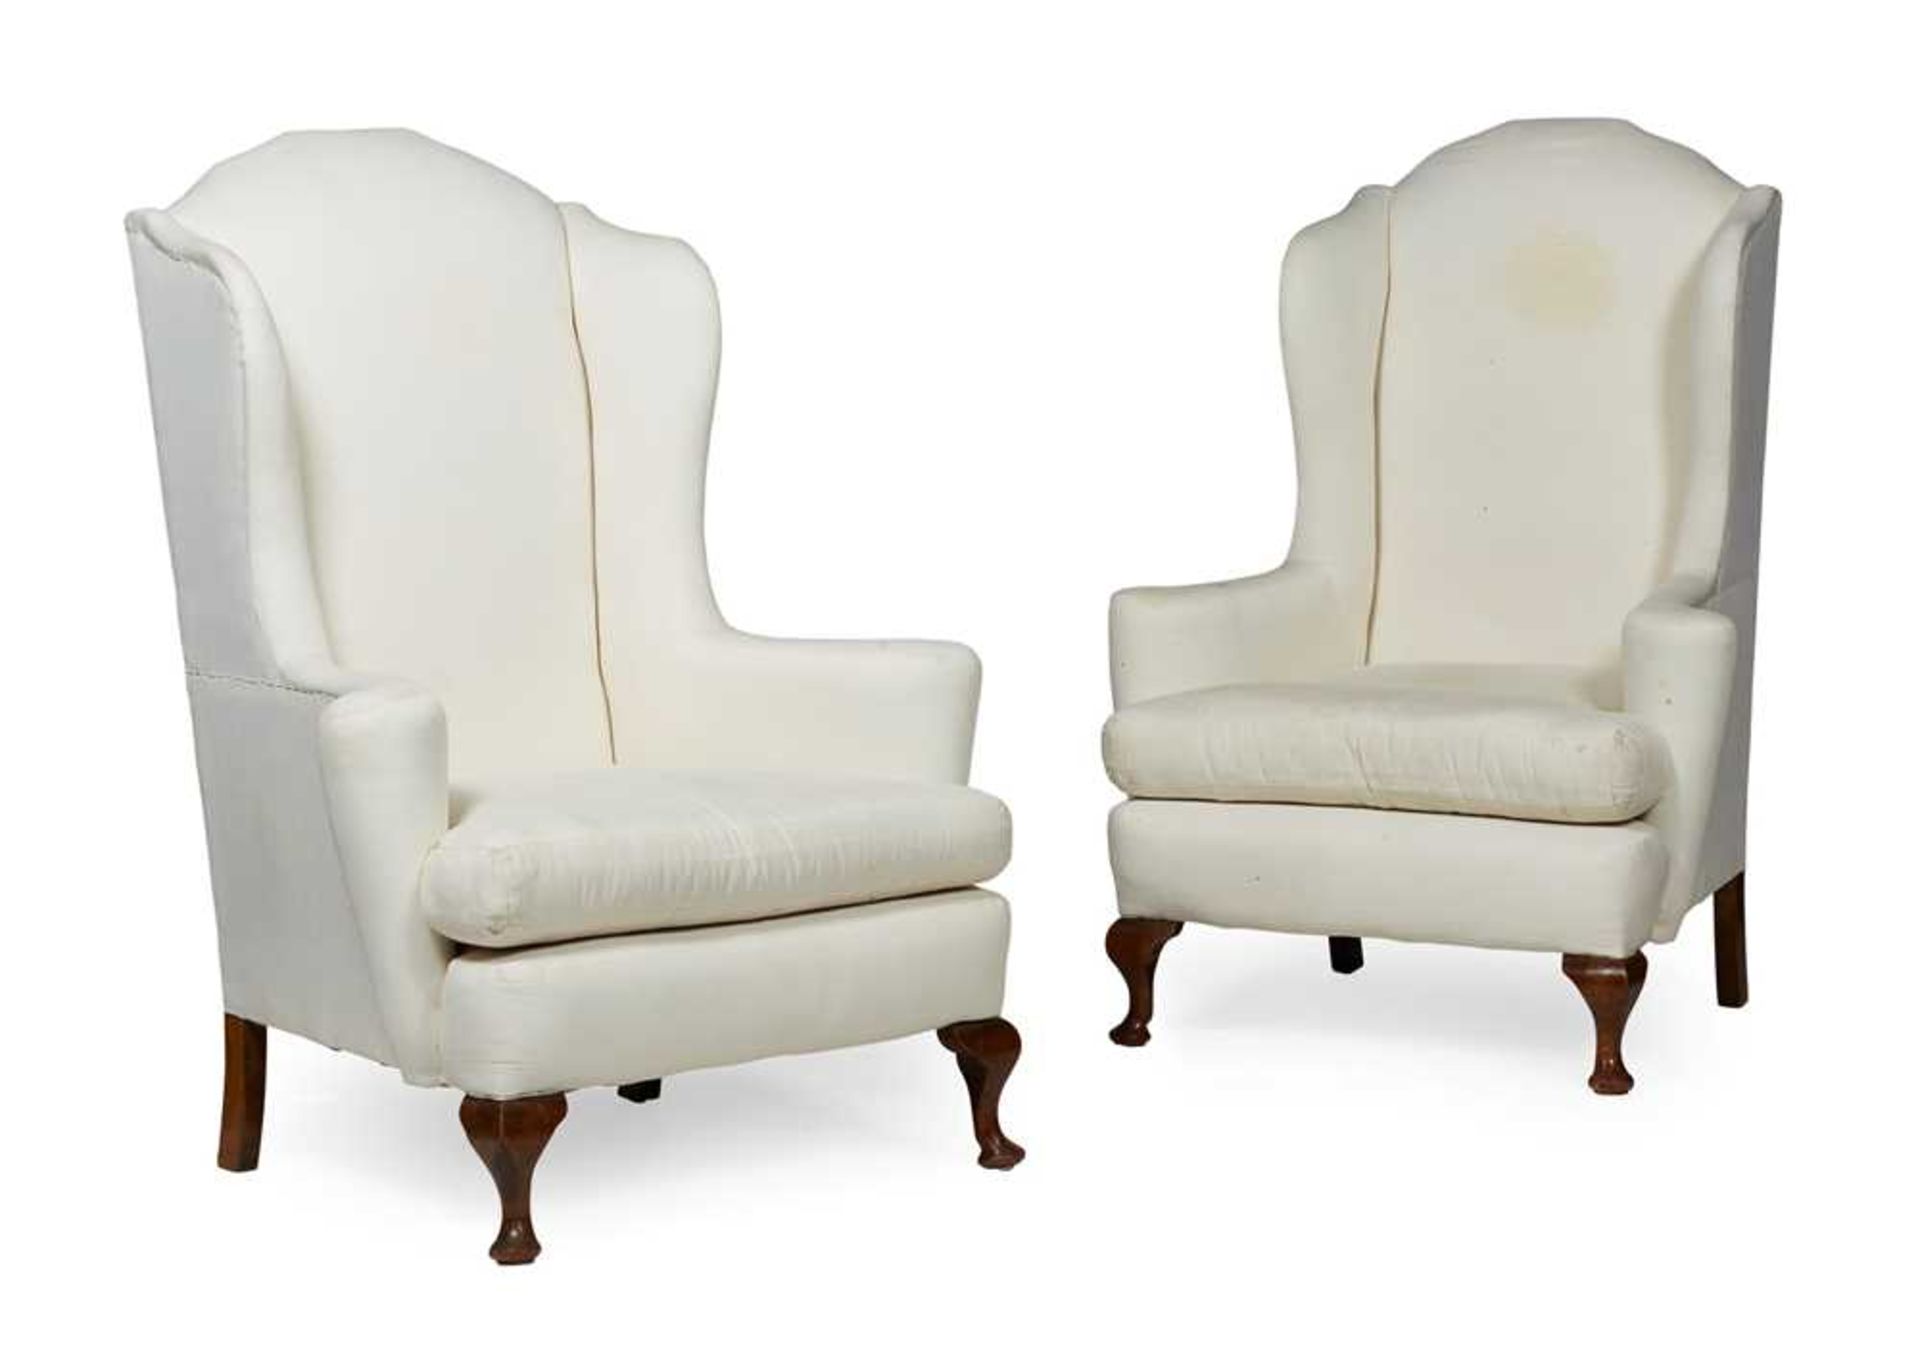 PAIR OF GEORGE I STYLE WINGBACK ARMCHAIRS LATE 19TH/ EARLY 20TH CENTURY